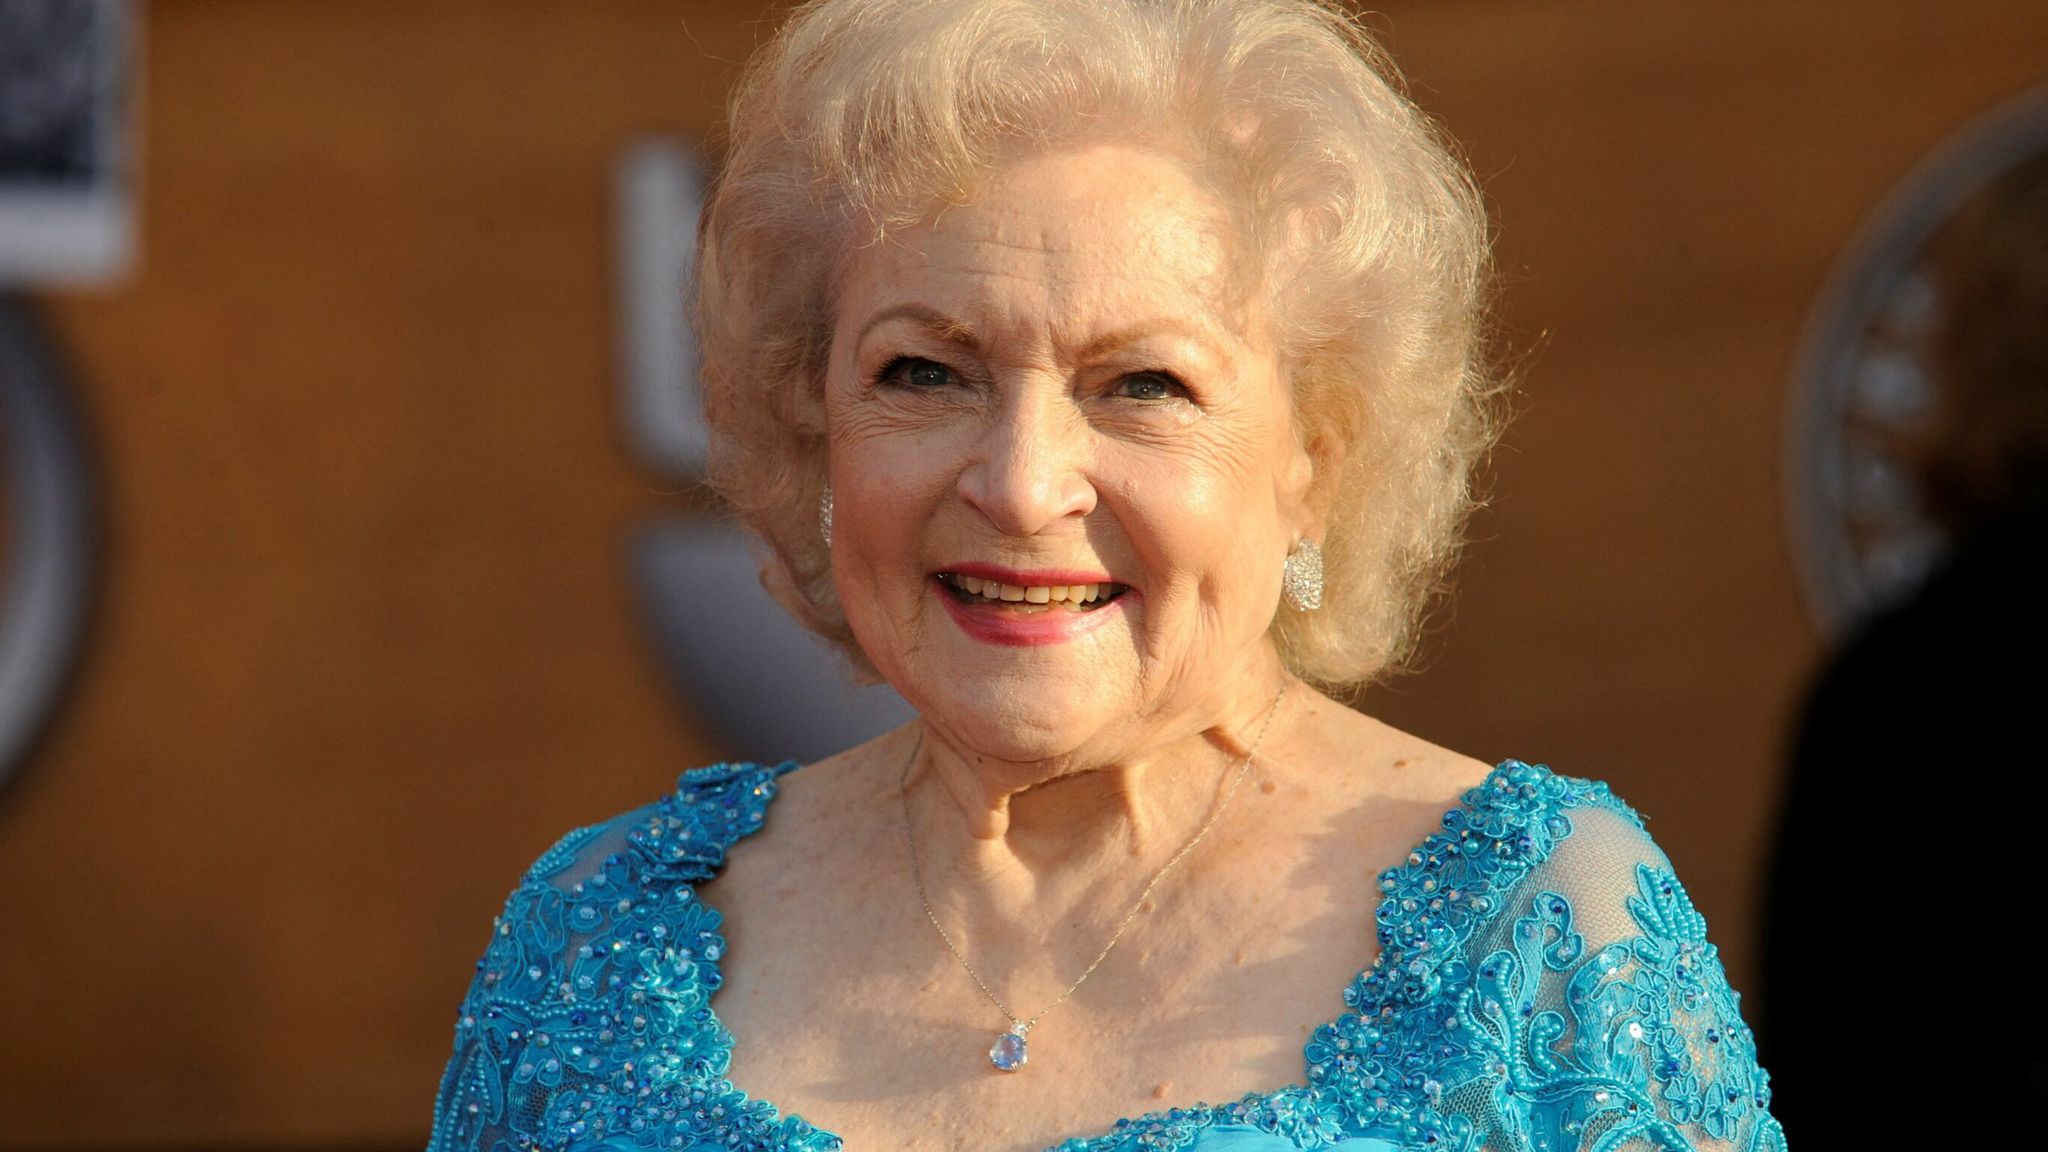 American icon Betty White has died at 99